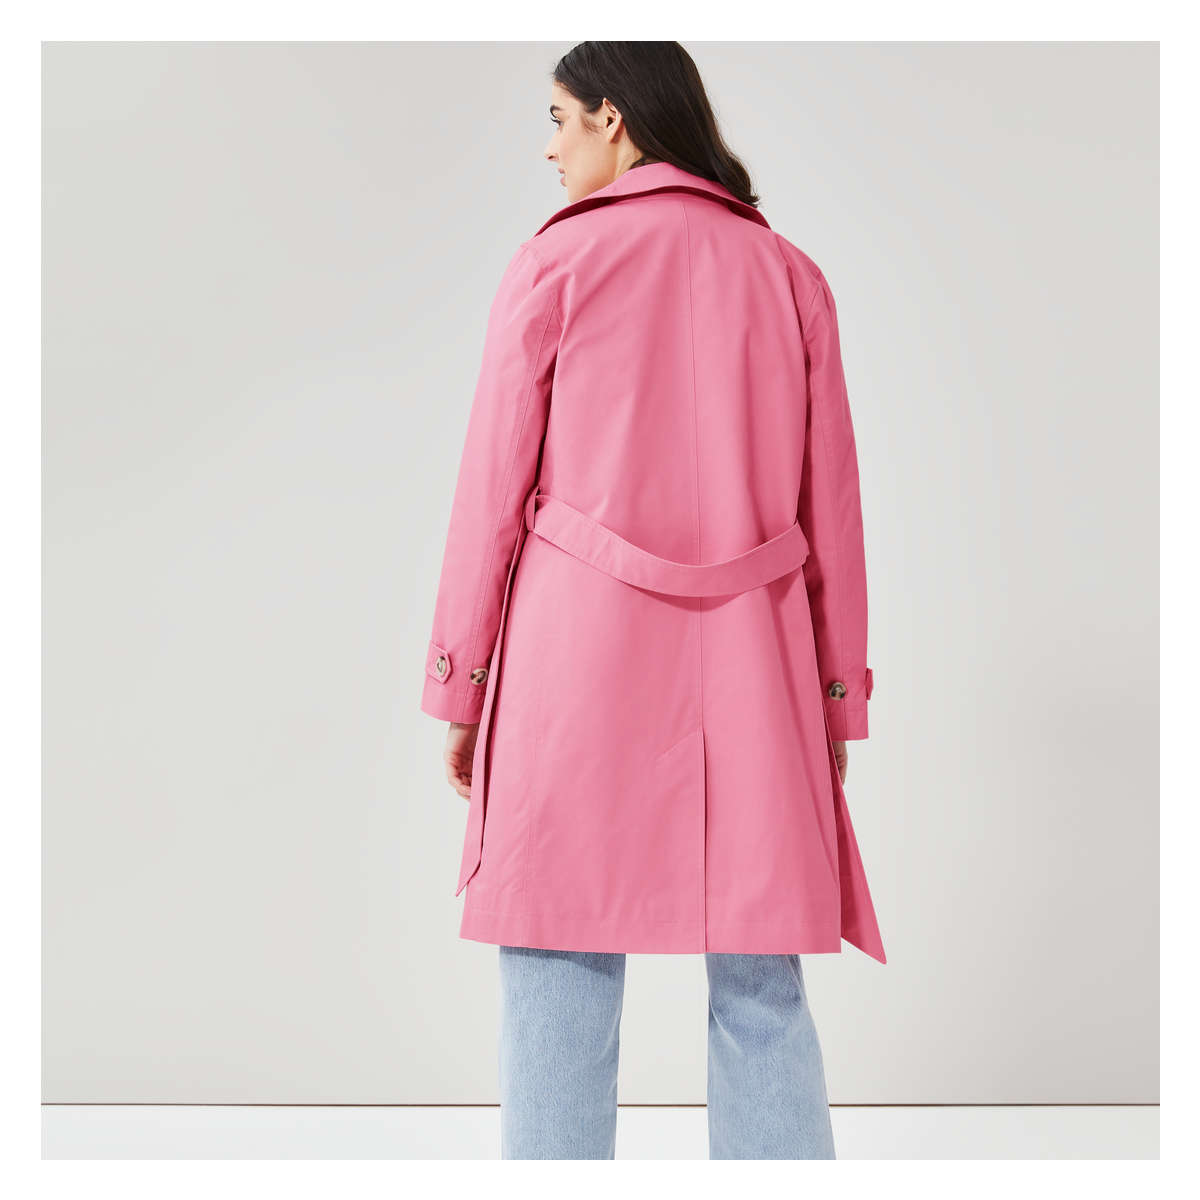 Essential Trench in Dusty Rose from Joe Fresh